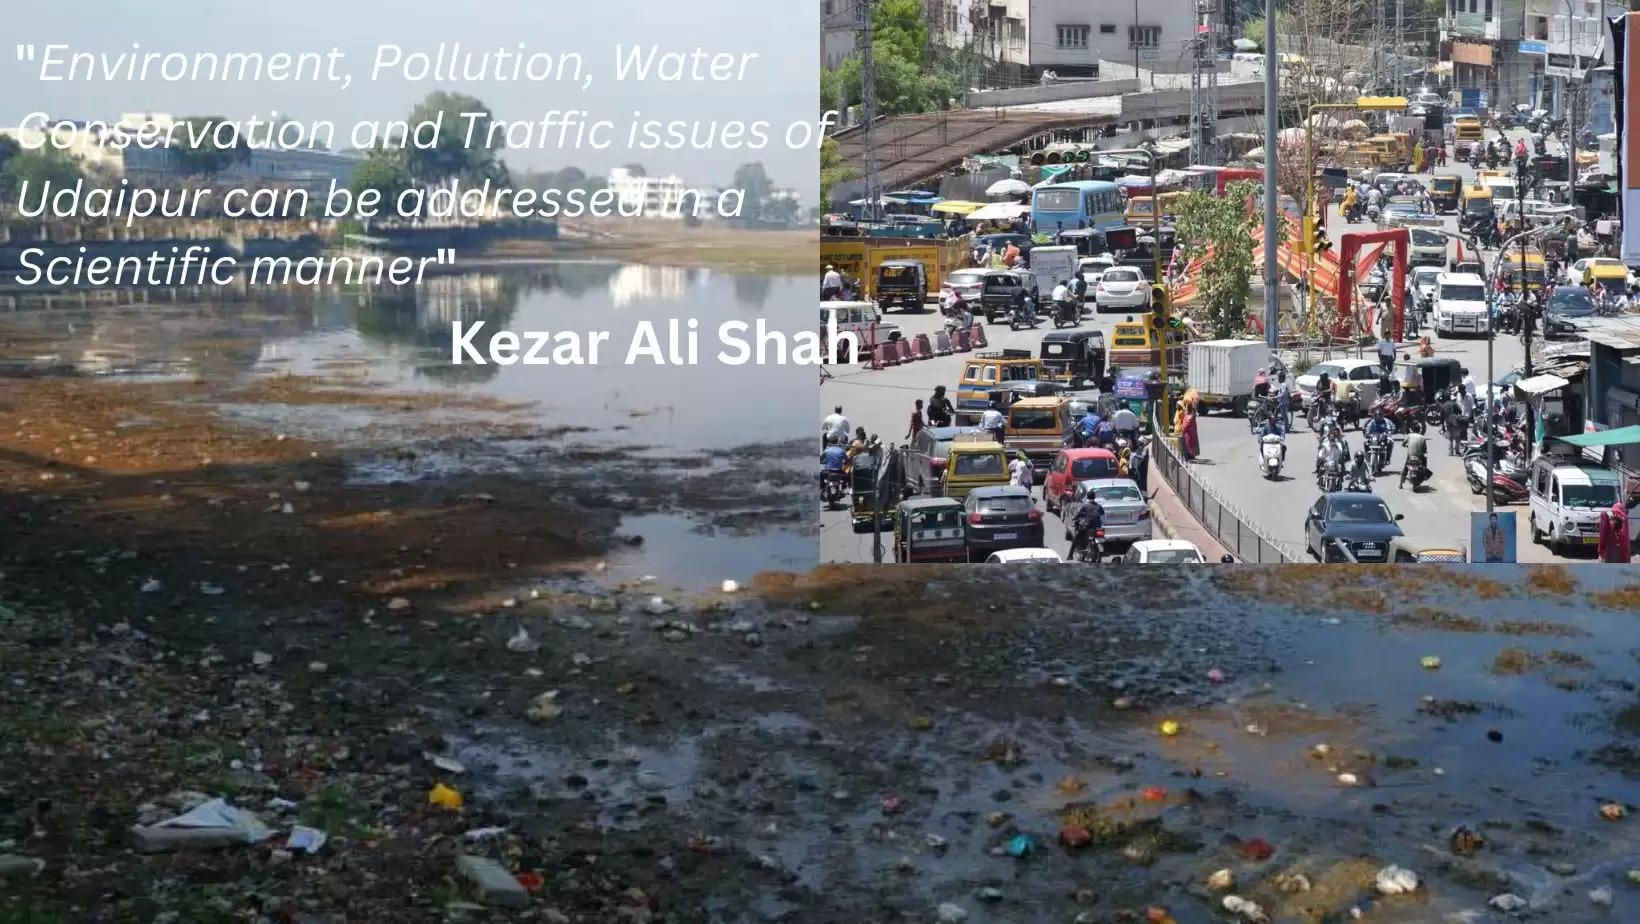 Environment Pollution in Udaipur, Traffic Congestion in Udaipur